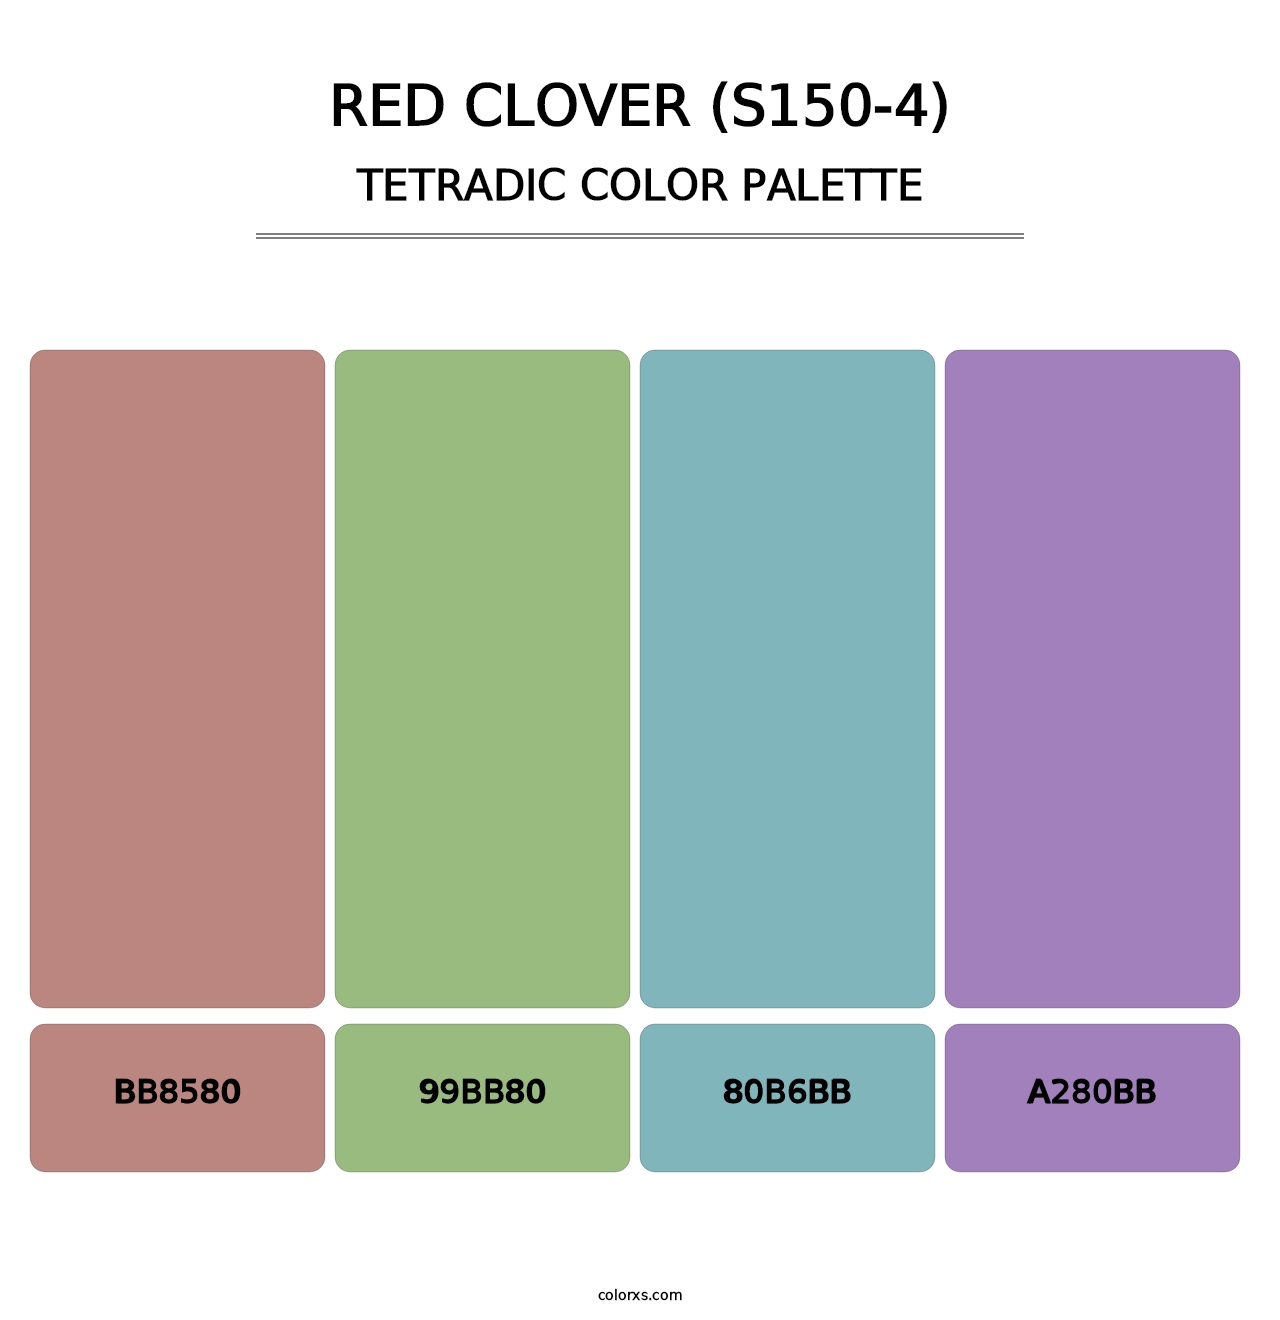 Red Clover (S150-4) - Tetradic Color Palette